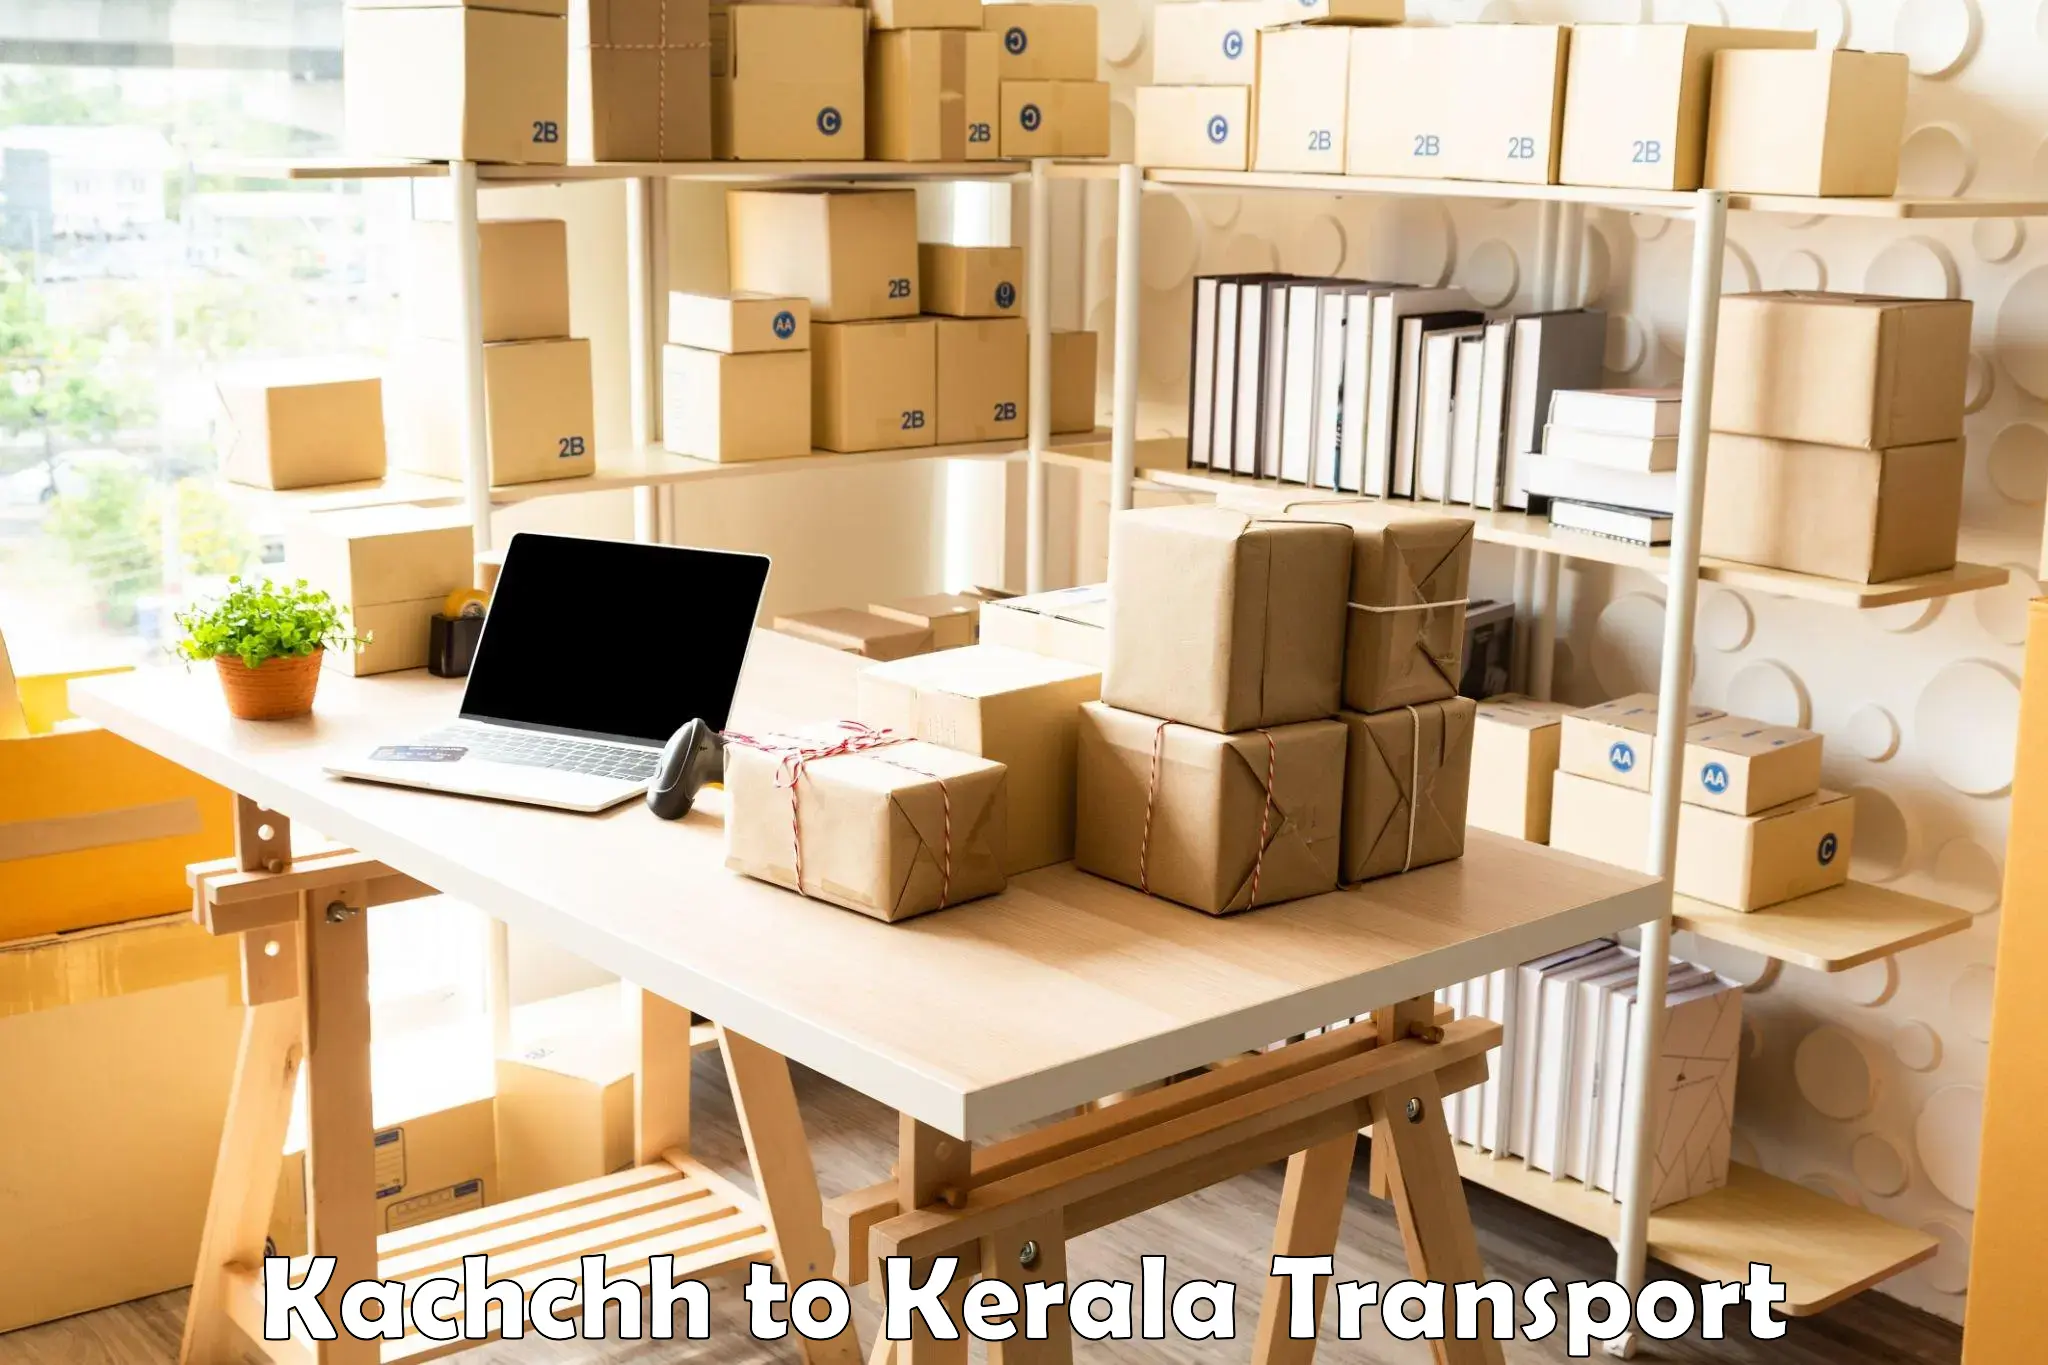 Transport shared services Kachchh to Cochin University of Science and Technology